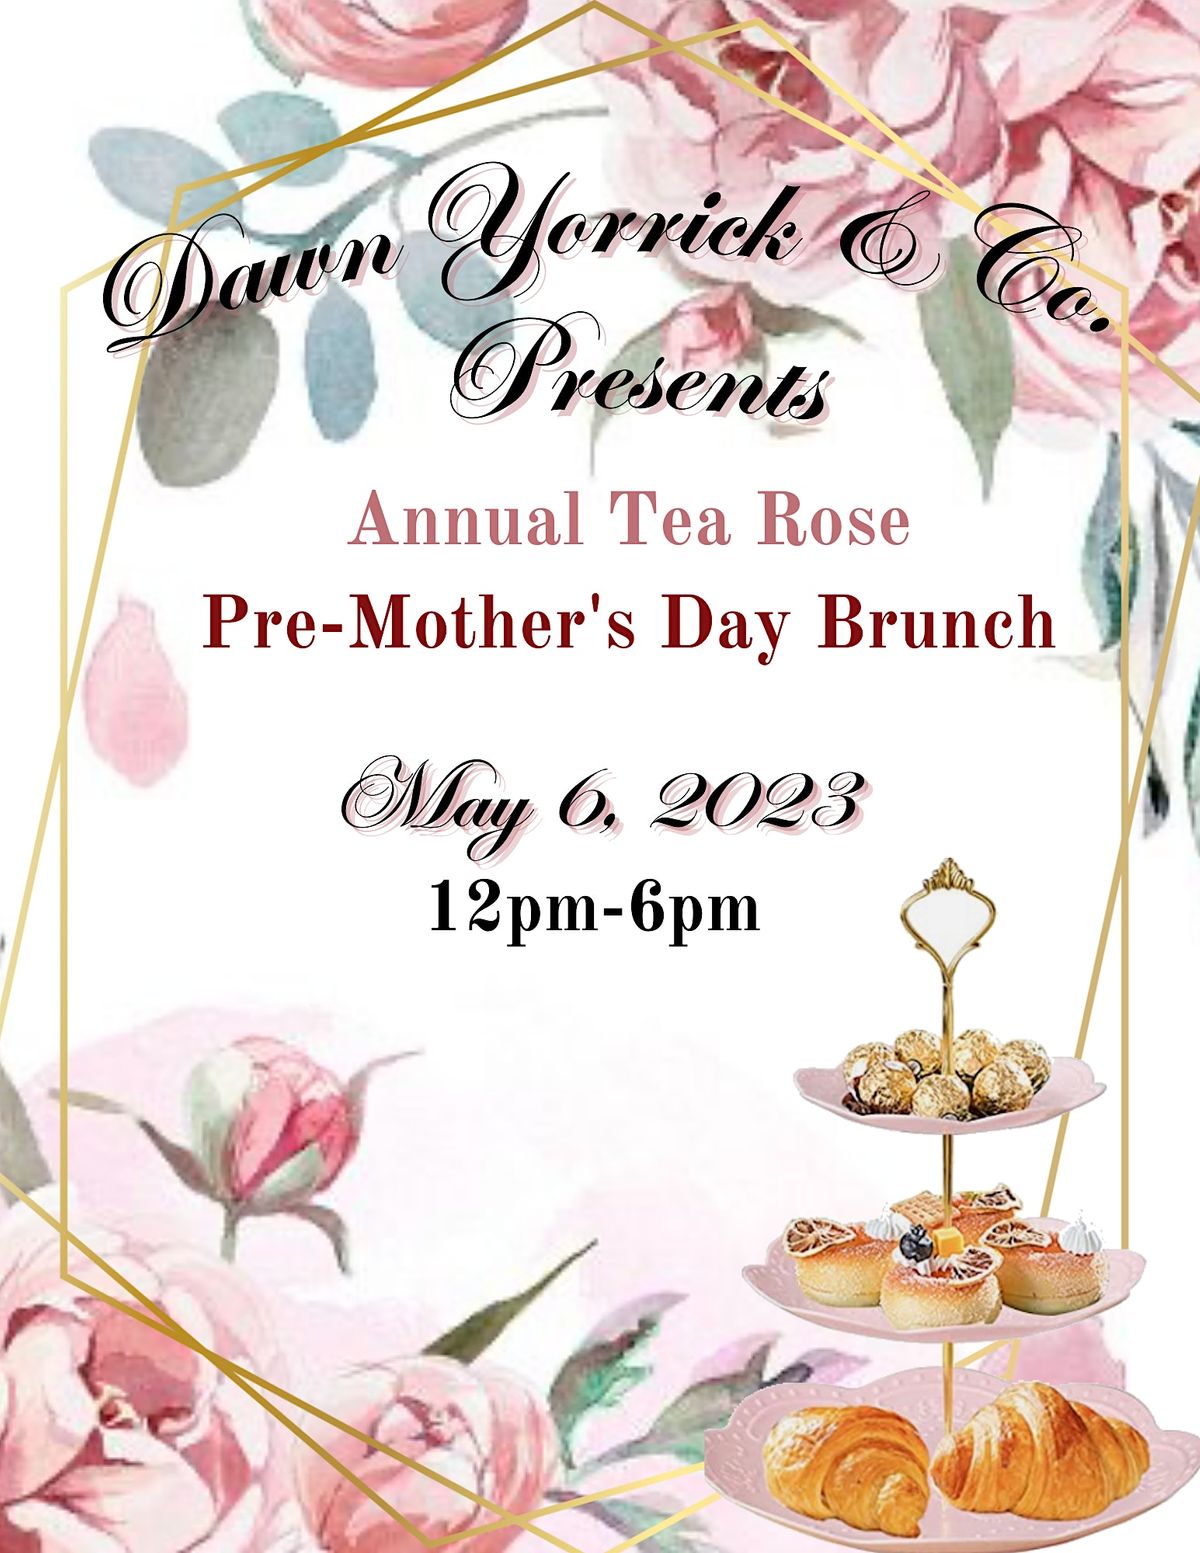 Annual Tea Rose Pre Mothers Day Brunch Fort Lauderdale Woman's Club